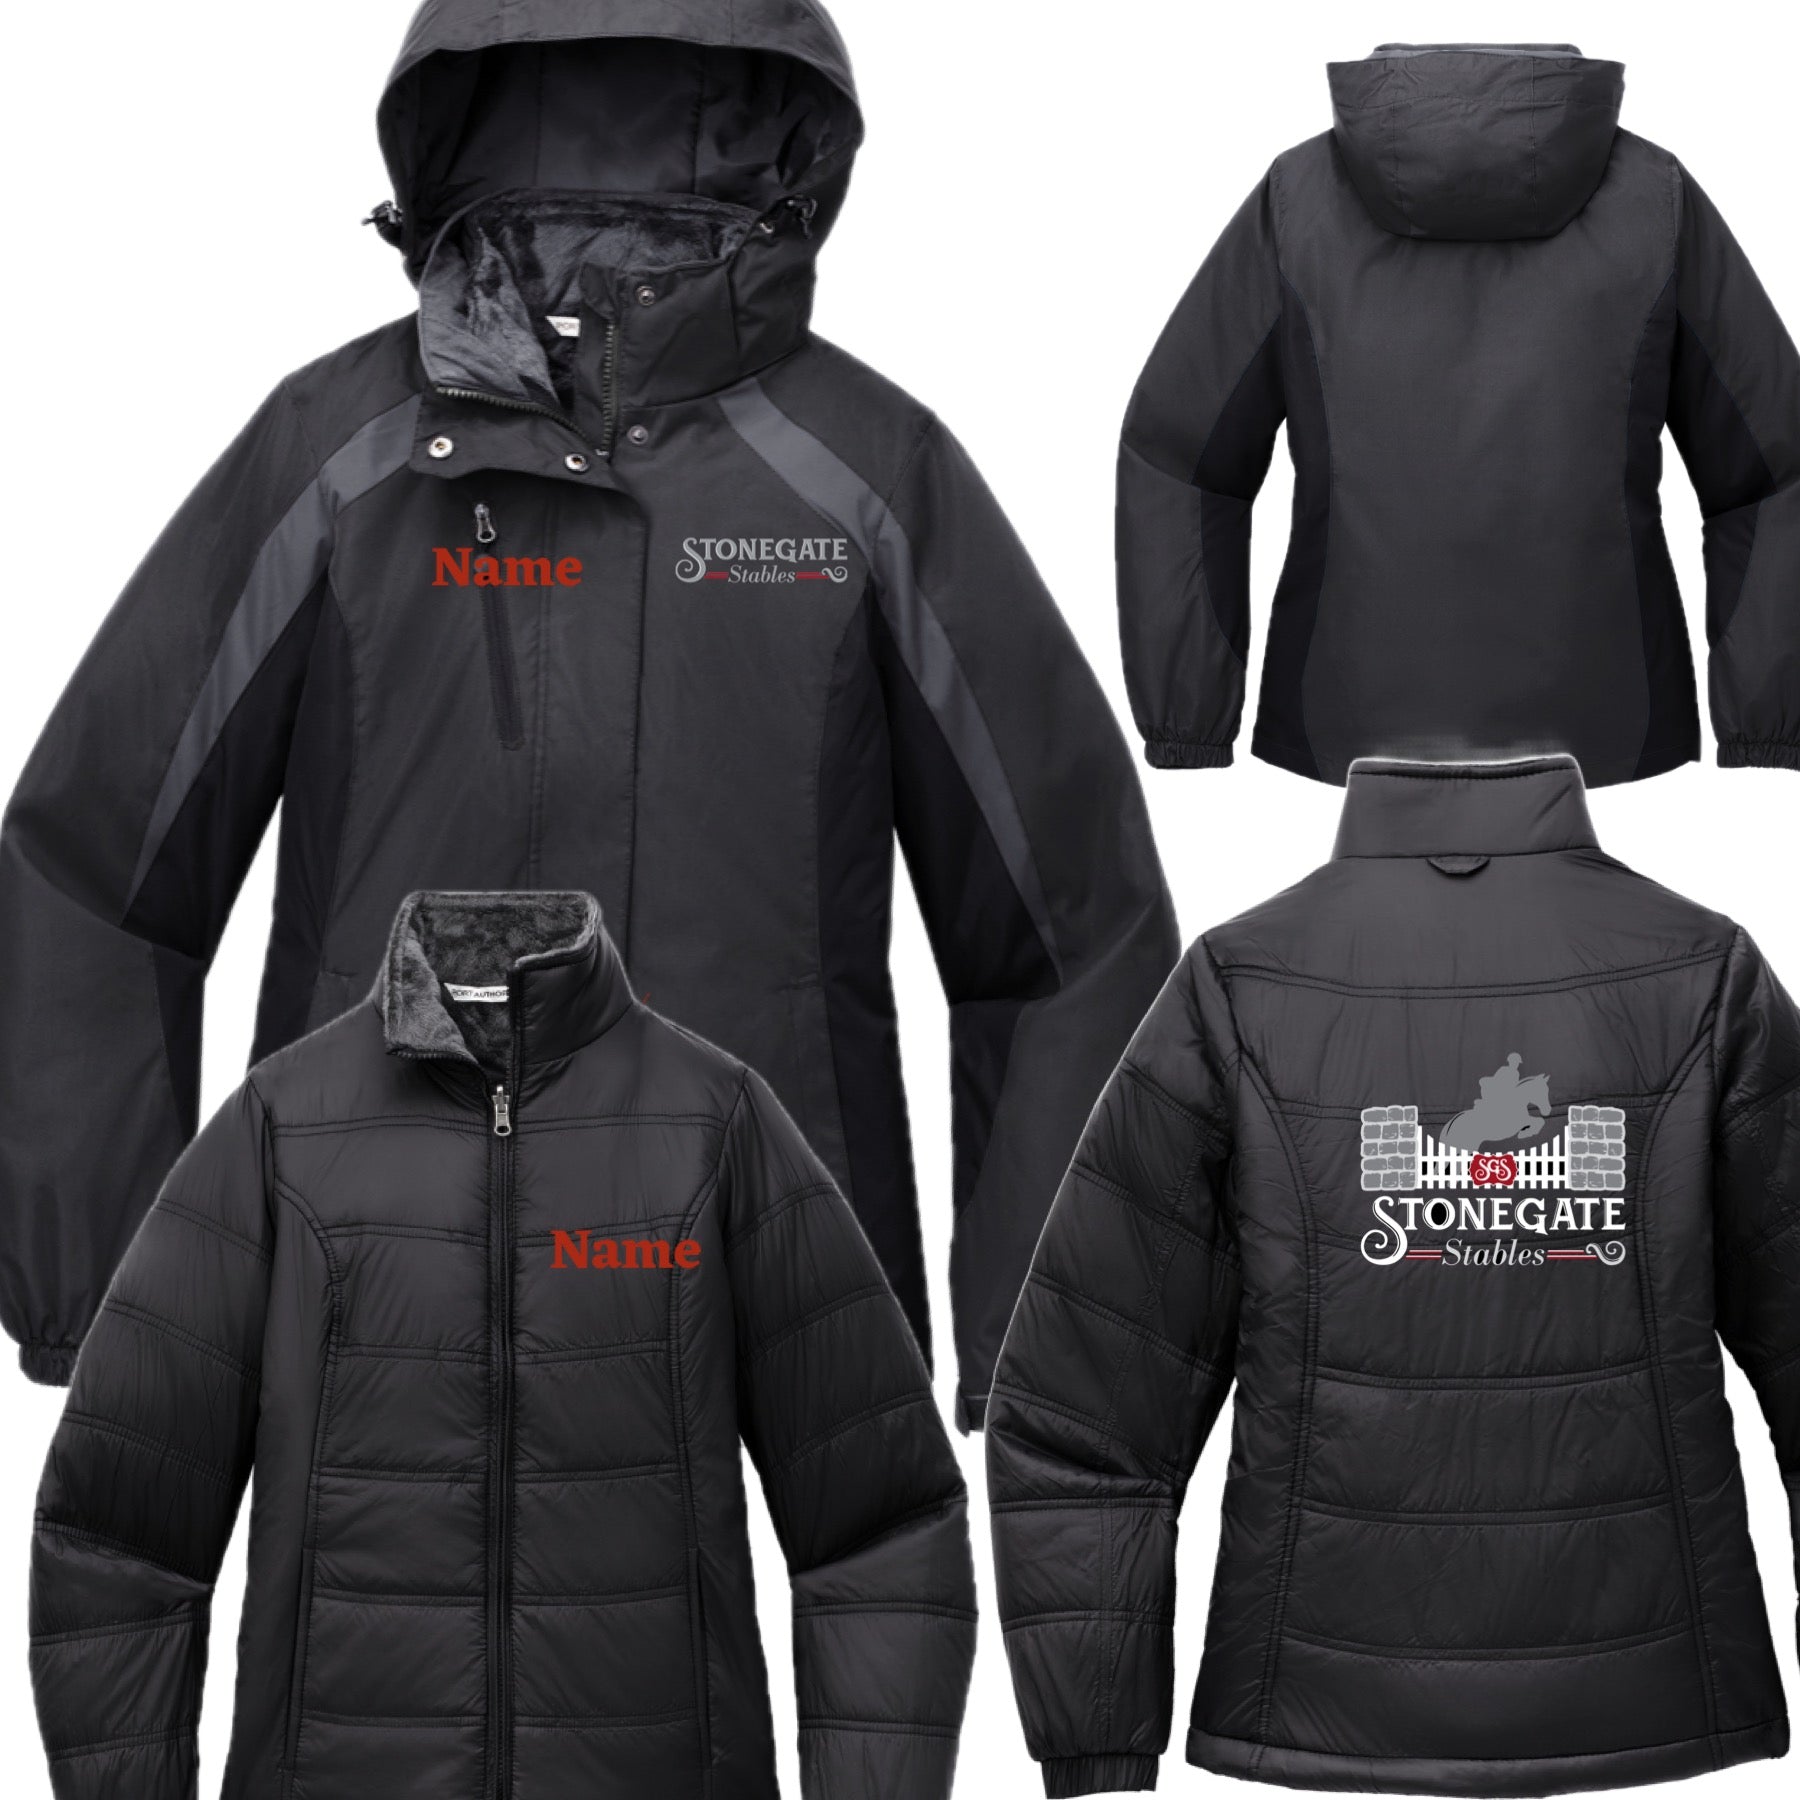 Equestrian Team Apparel Stonegate Stables 3in1 Heavy Jacket equestrian team apparel online tack store mobile tack store custom farm apparel custom show stable clothing equestrian lifestyle horse show clothing riding clothes horses equestrian tack store